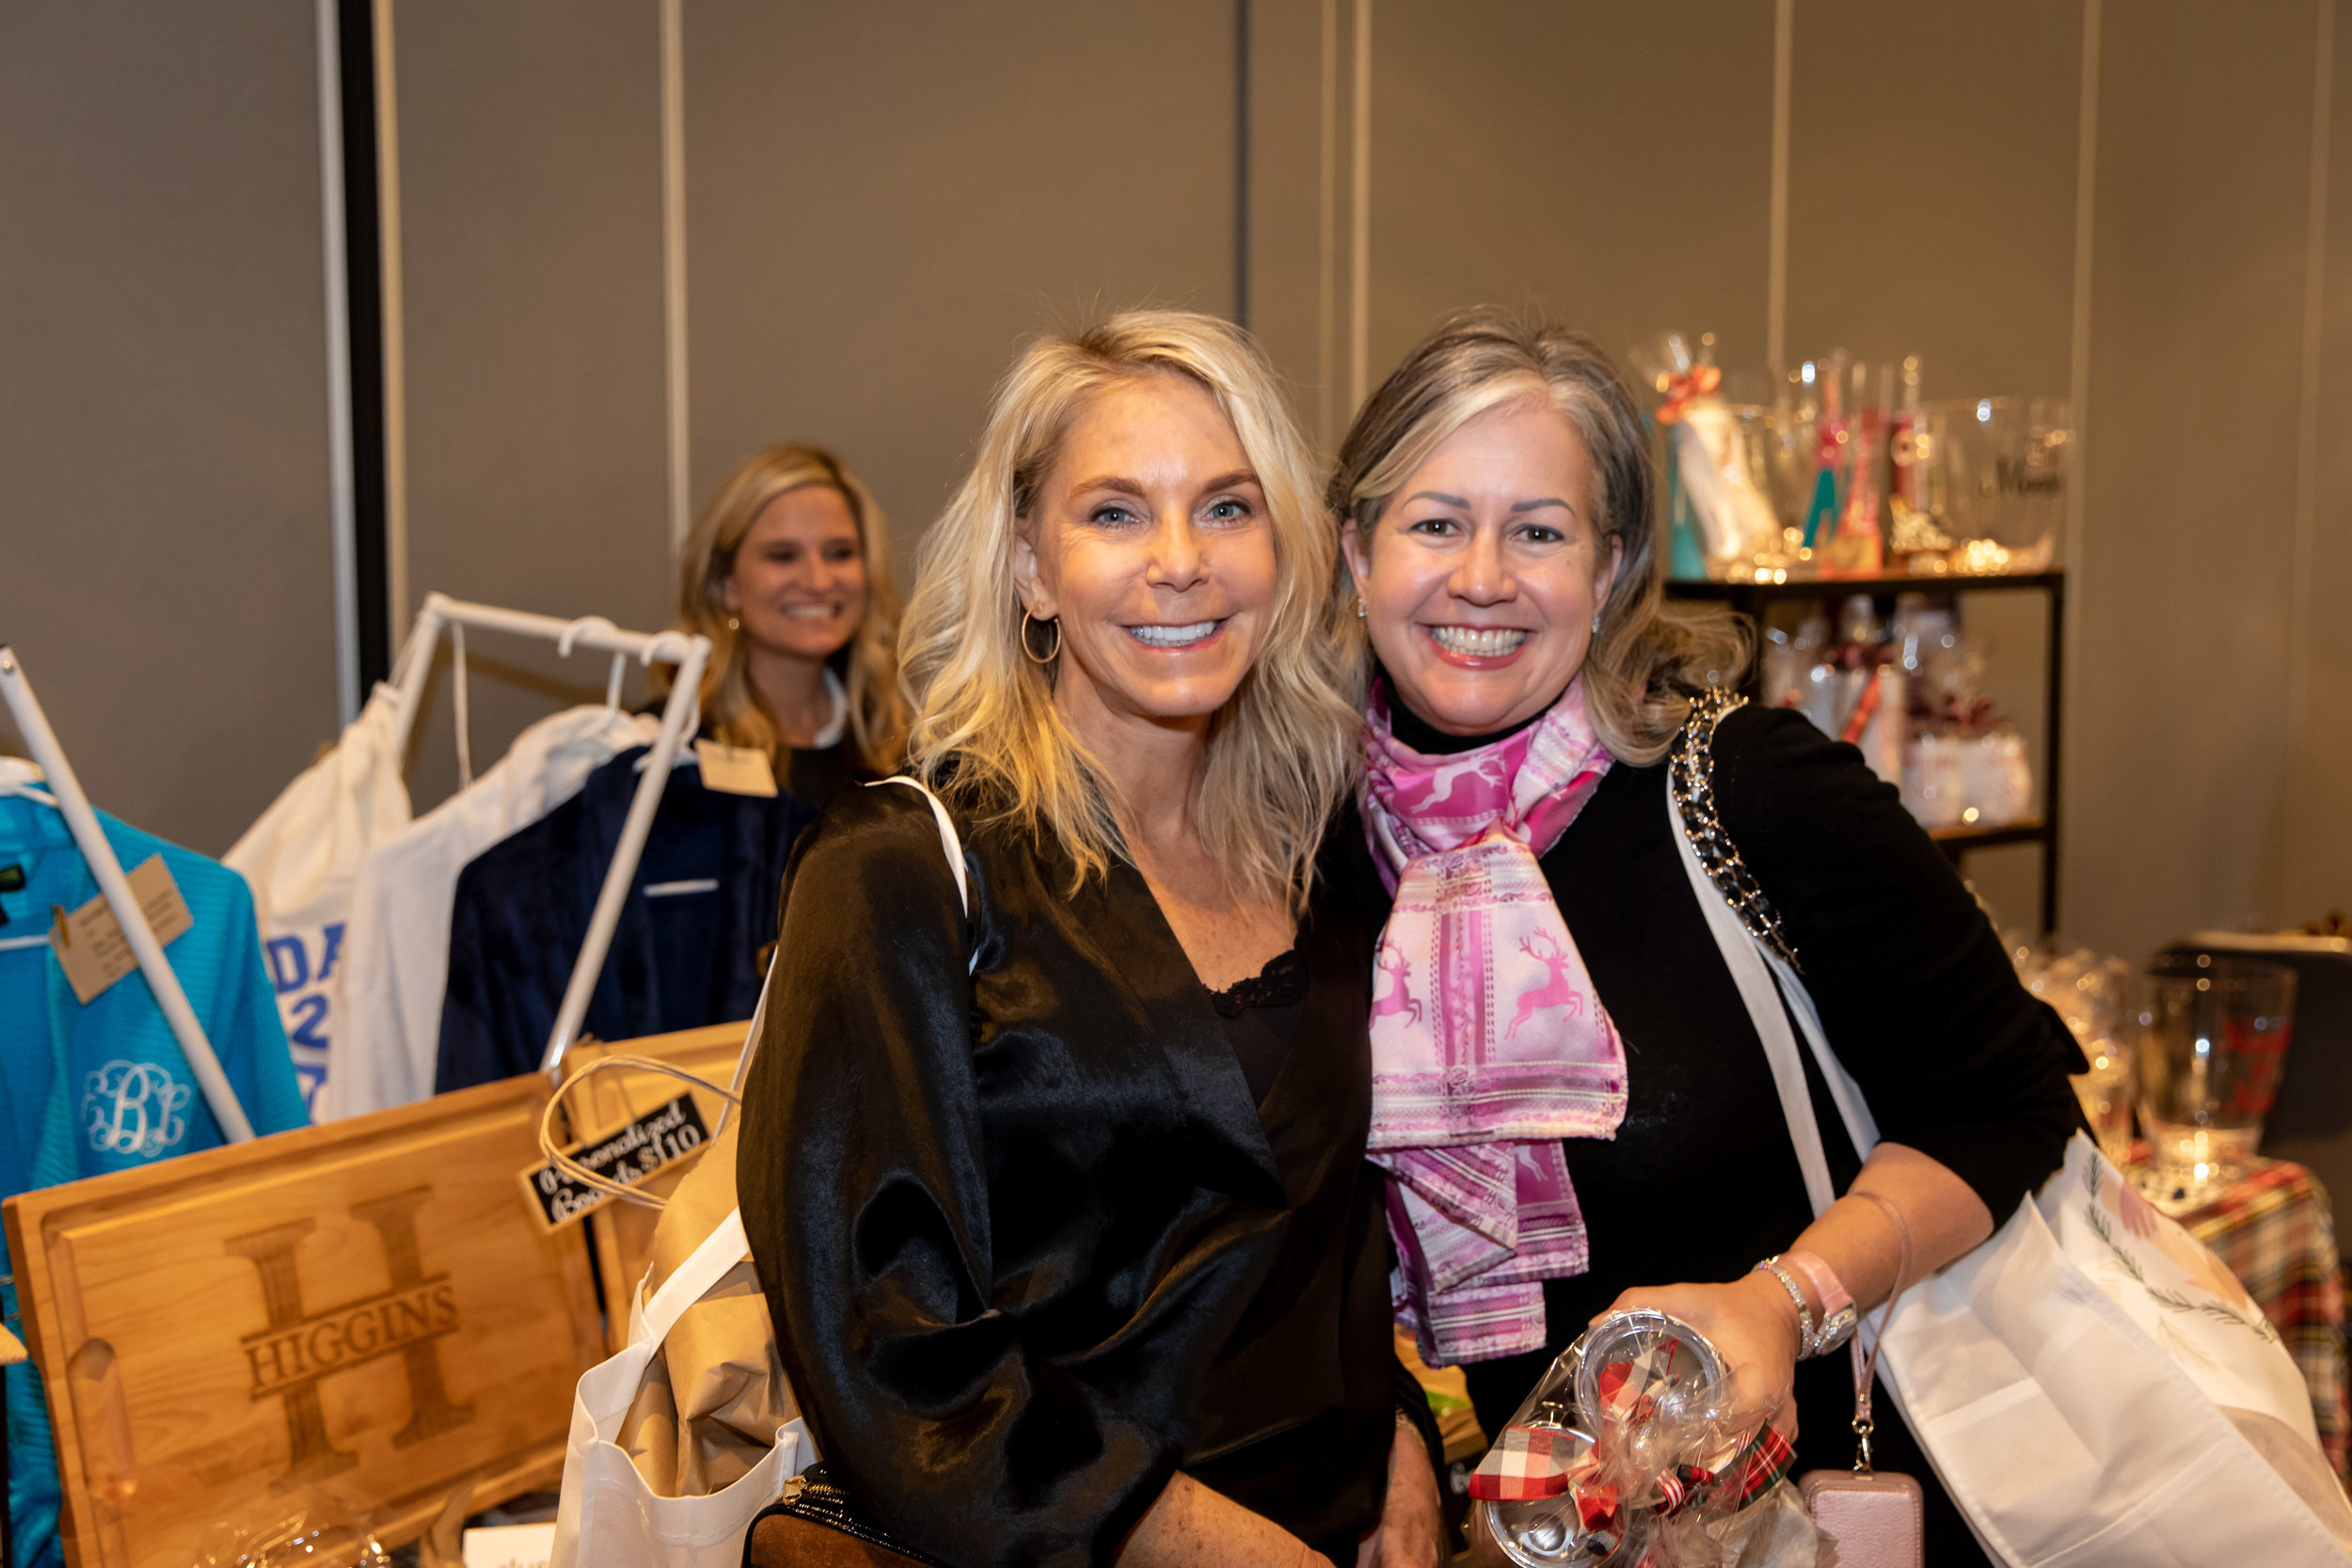 038_Catherine Hall Studios_CHG Holiday Boutique and Luncheon December 2018.jpg